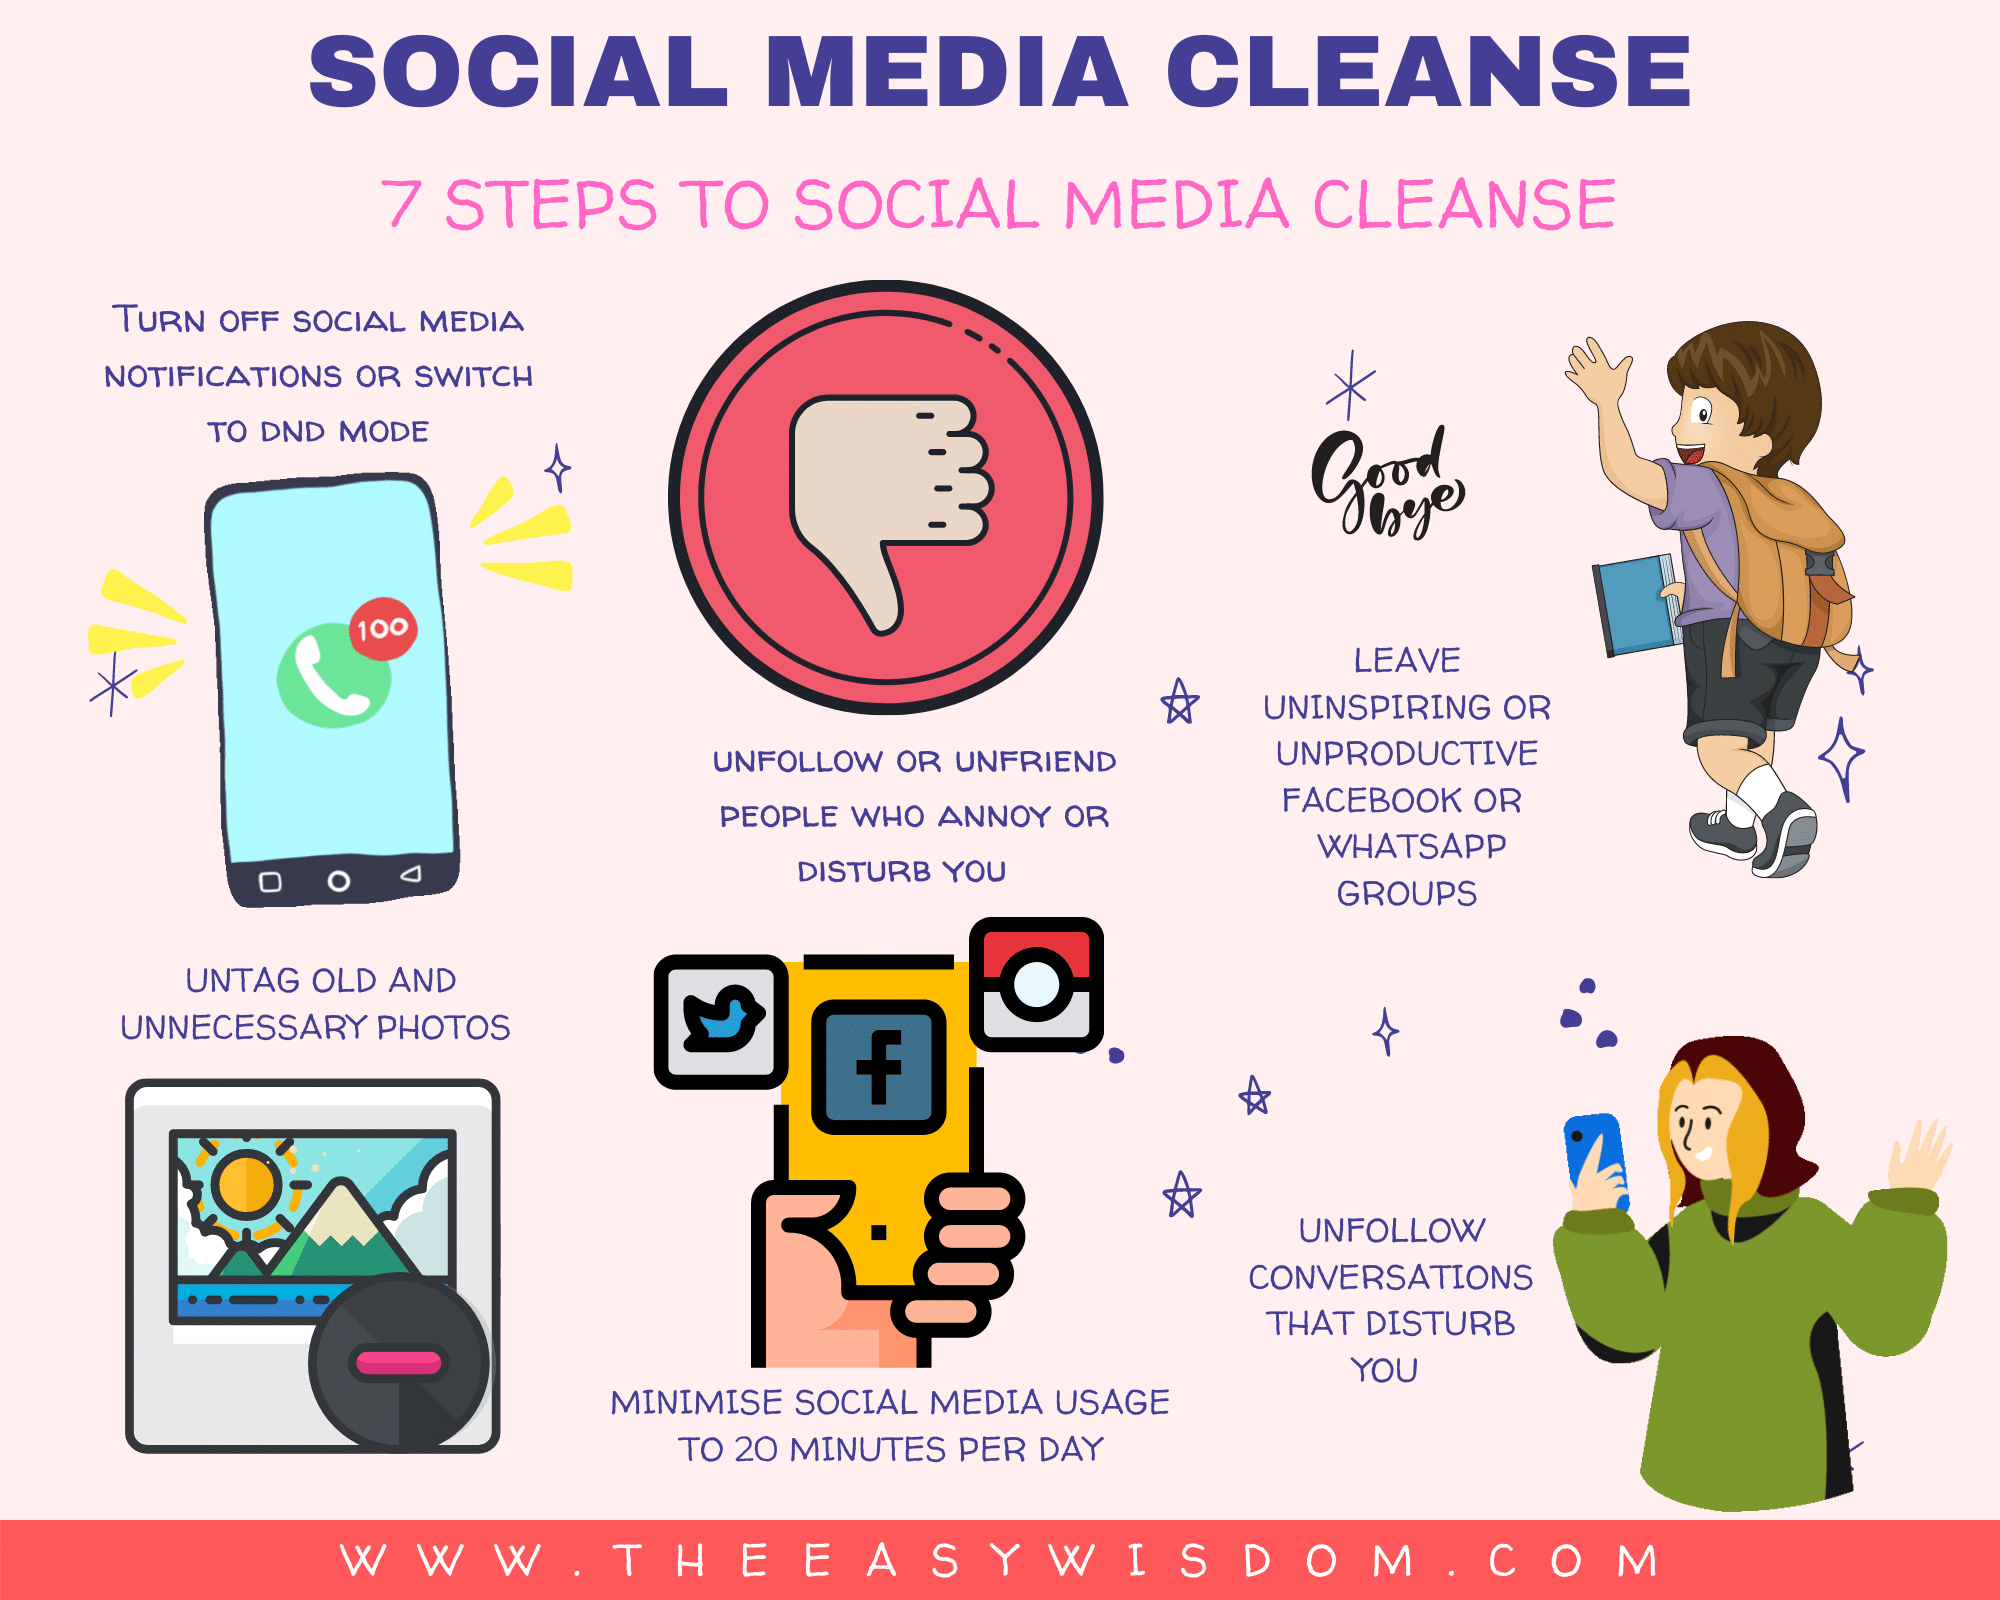 Social Media Cleanse Infographic-www.theeasywisdom.com